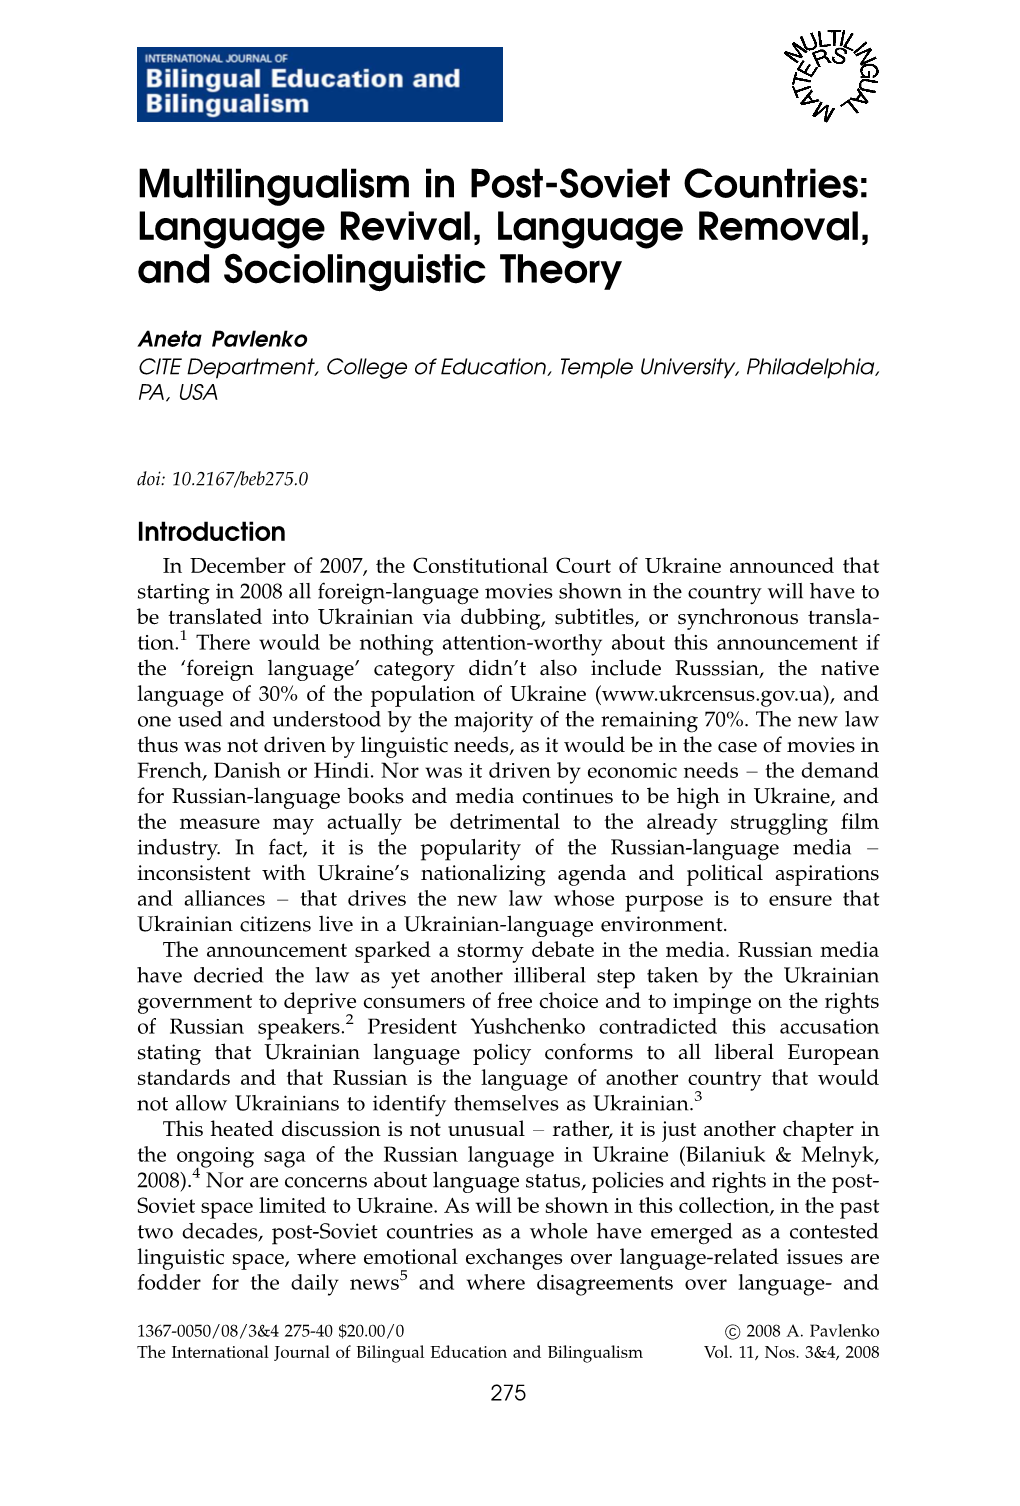 Multilingualism in Post-Soviet Countries: Language Revival, Language Removal, and Sociolinguistic Theory